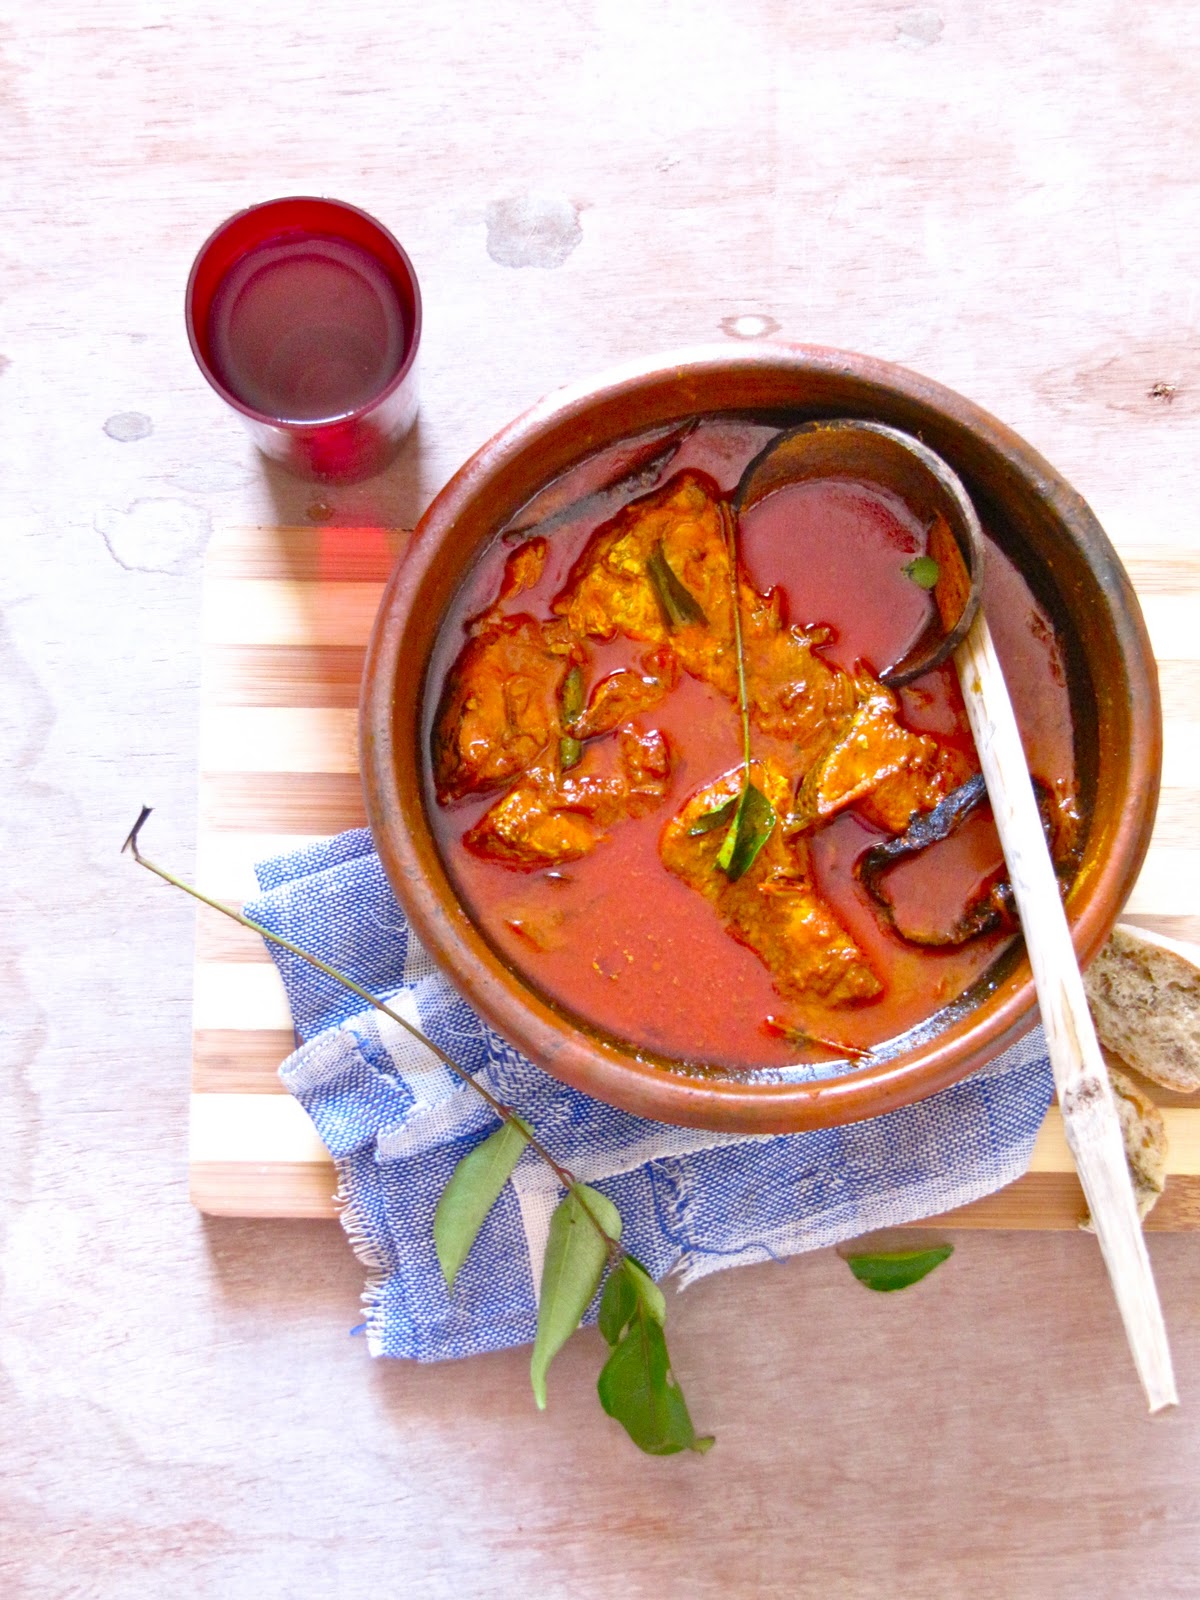 Plateful: Claypot Fish Curry with Coconut Milk — a welcome simplicity ...